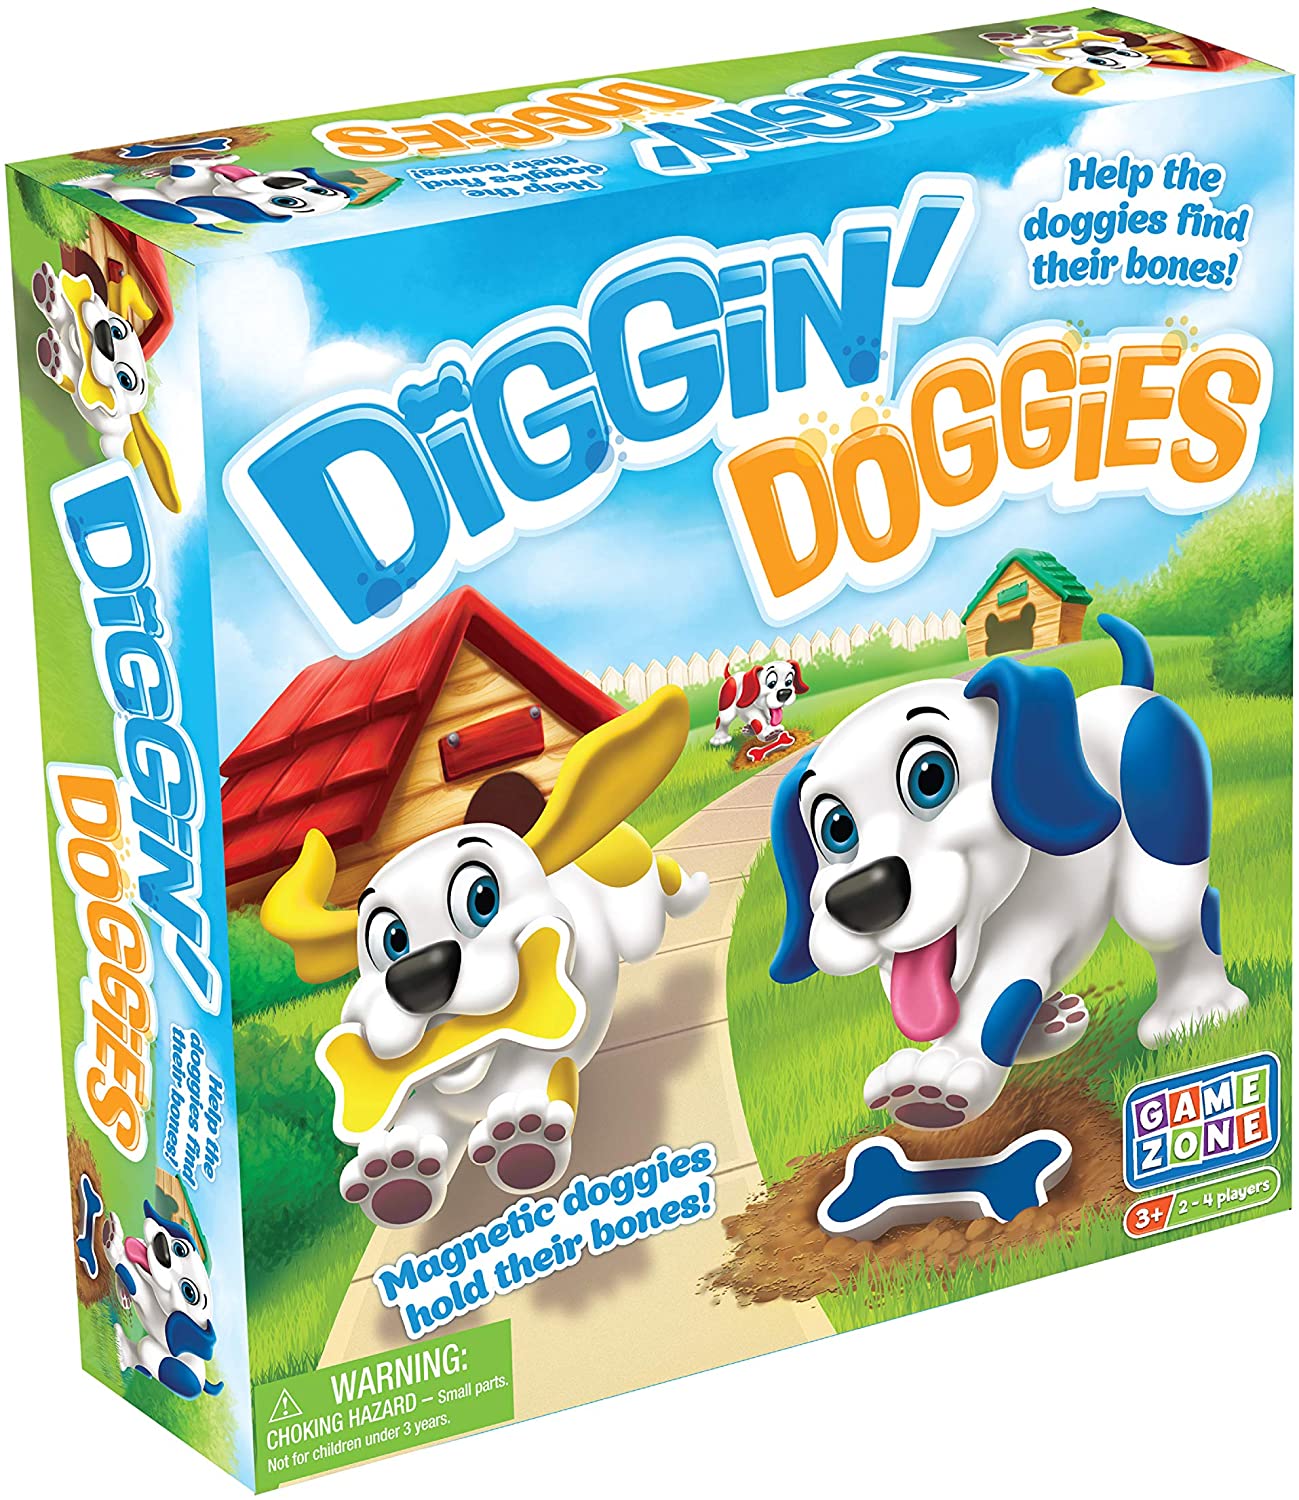 Diggity Dogs